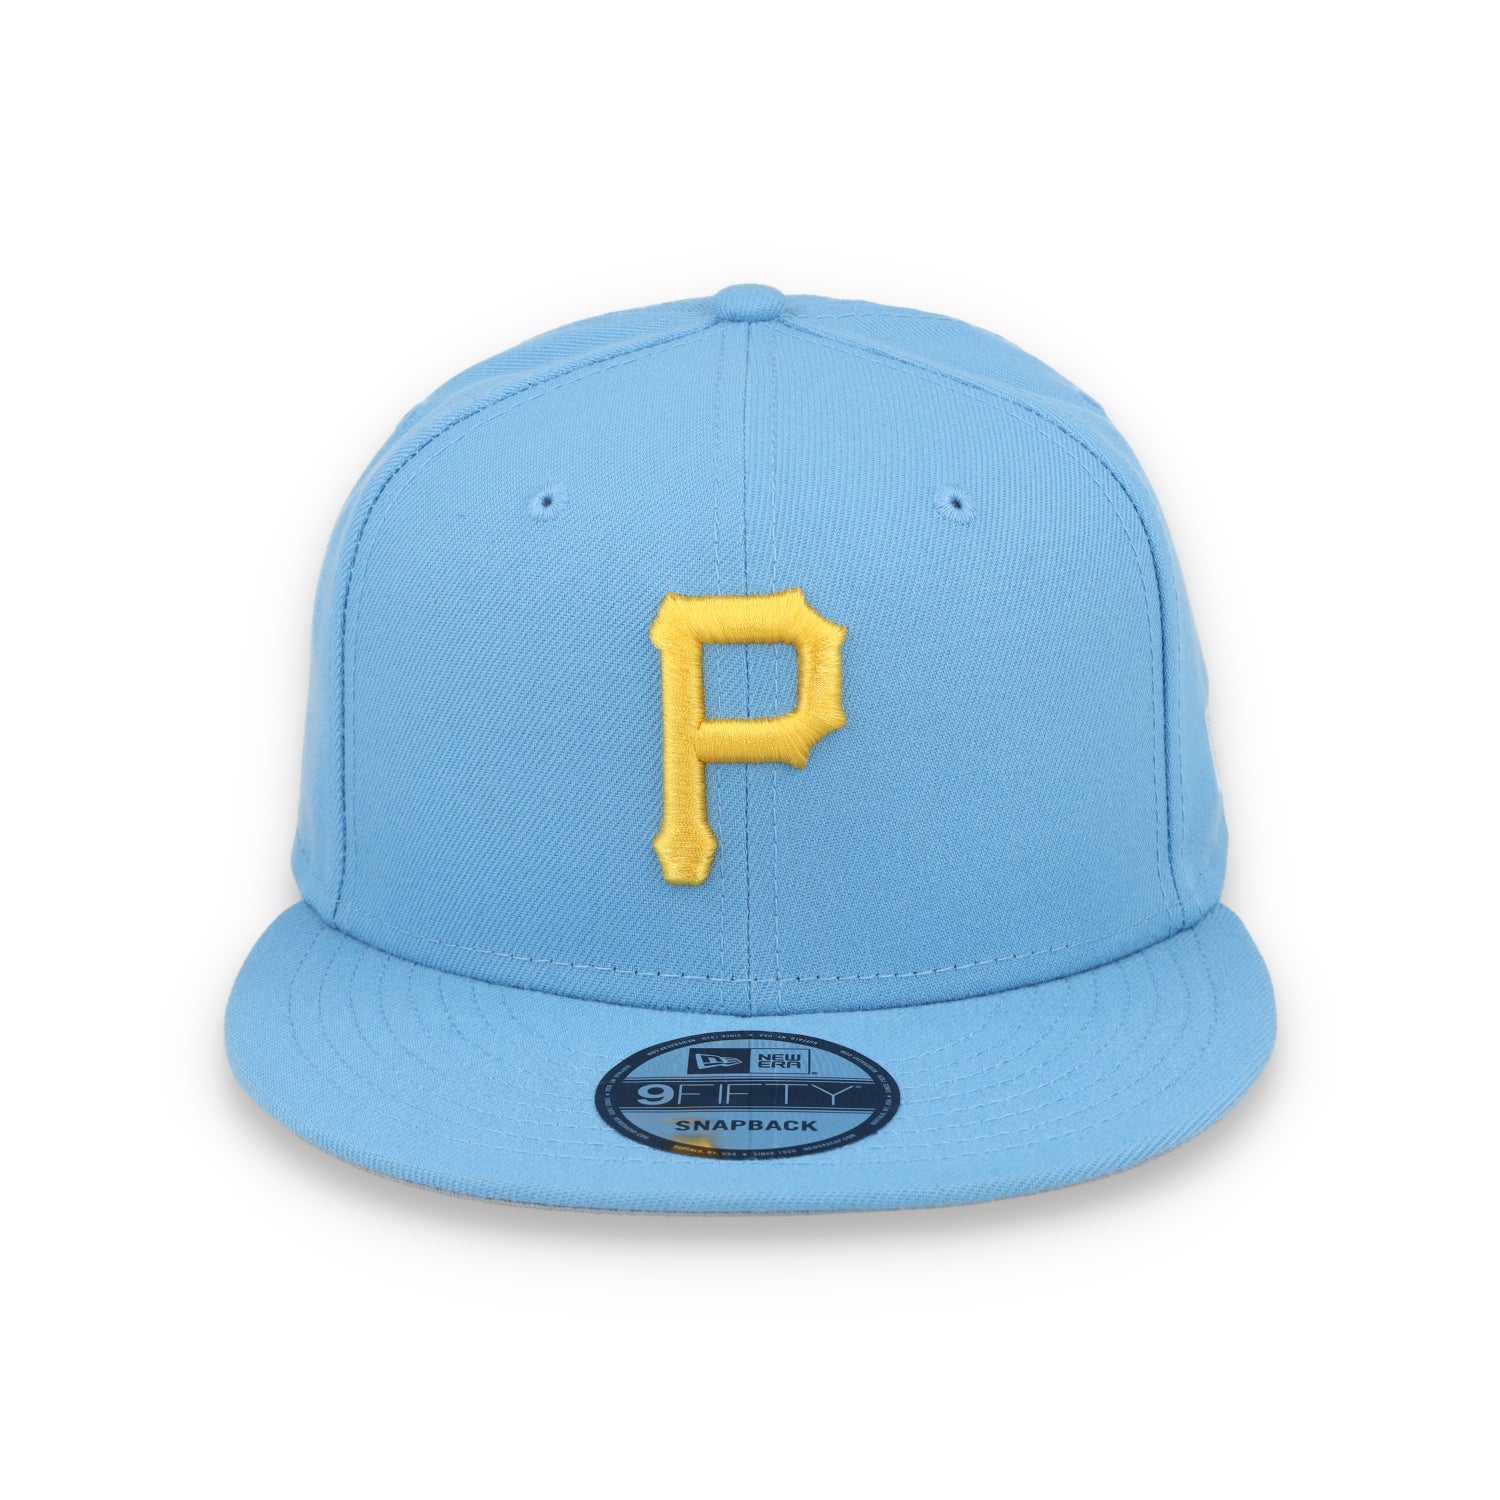 New Era Pittsburgh Pirates Game Day 9FIFTY Snapback Hat - Sky Blue